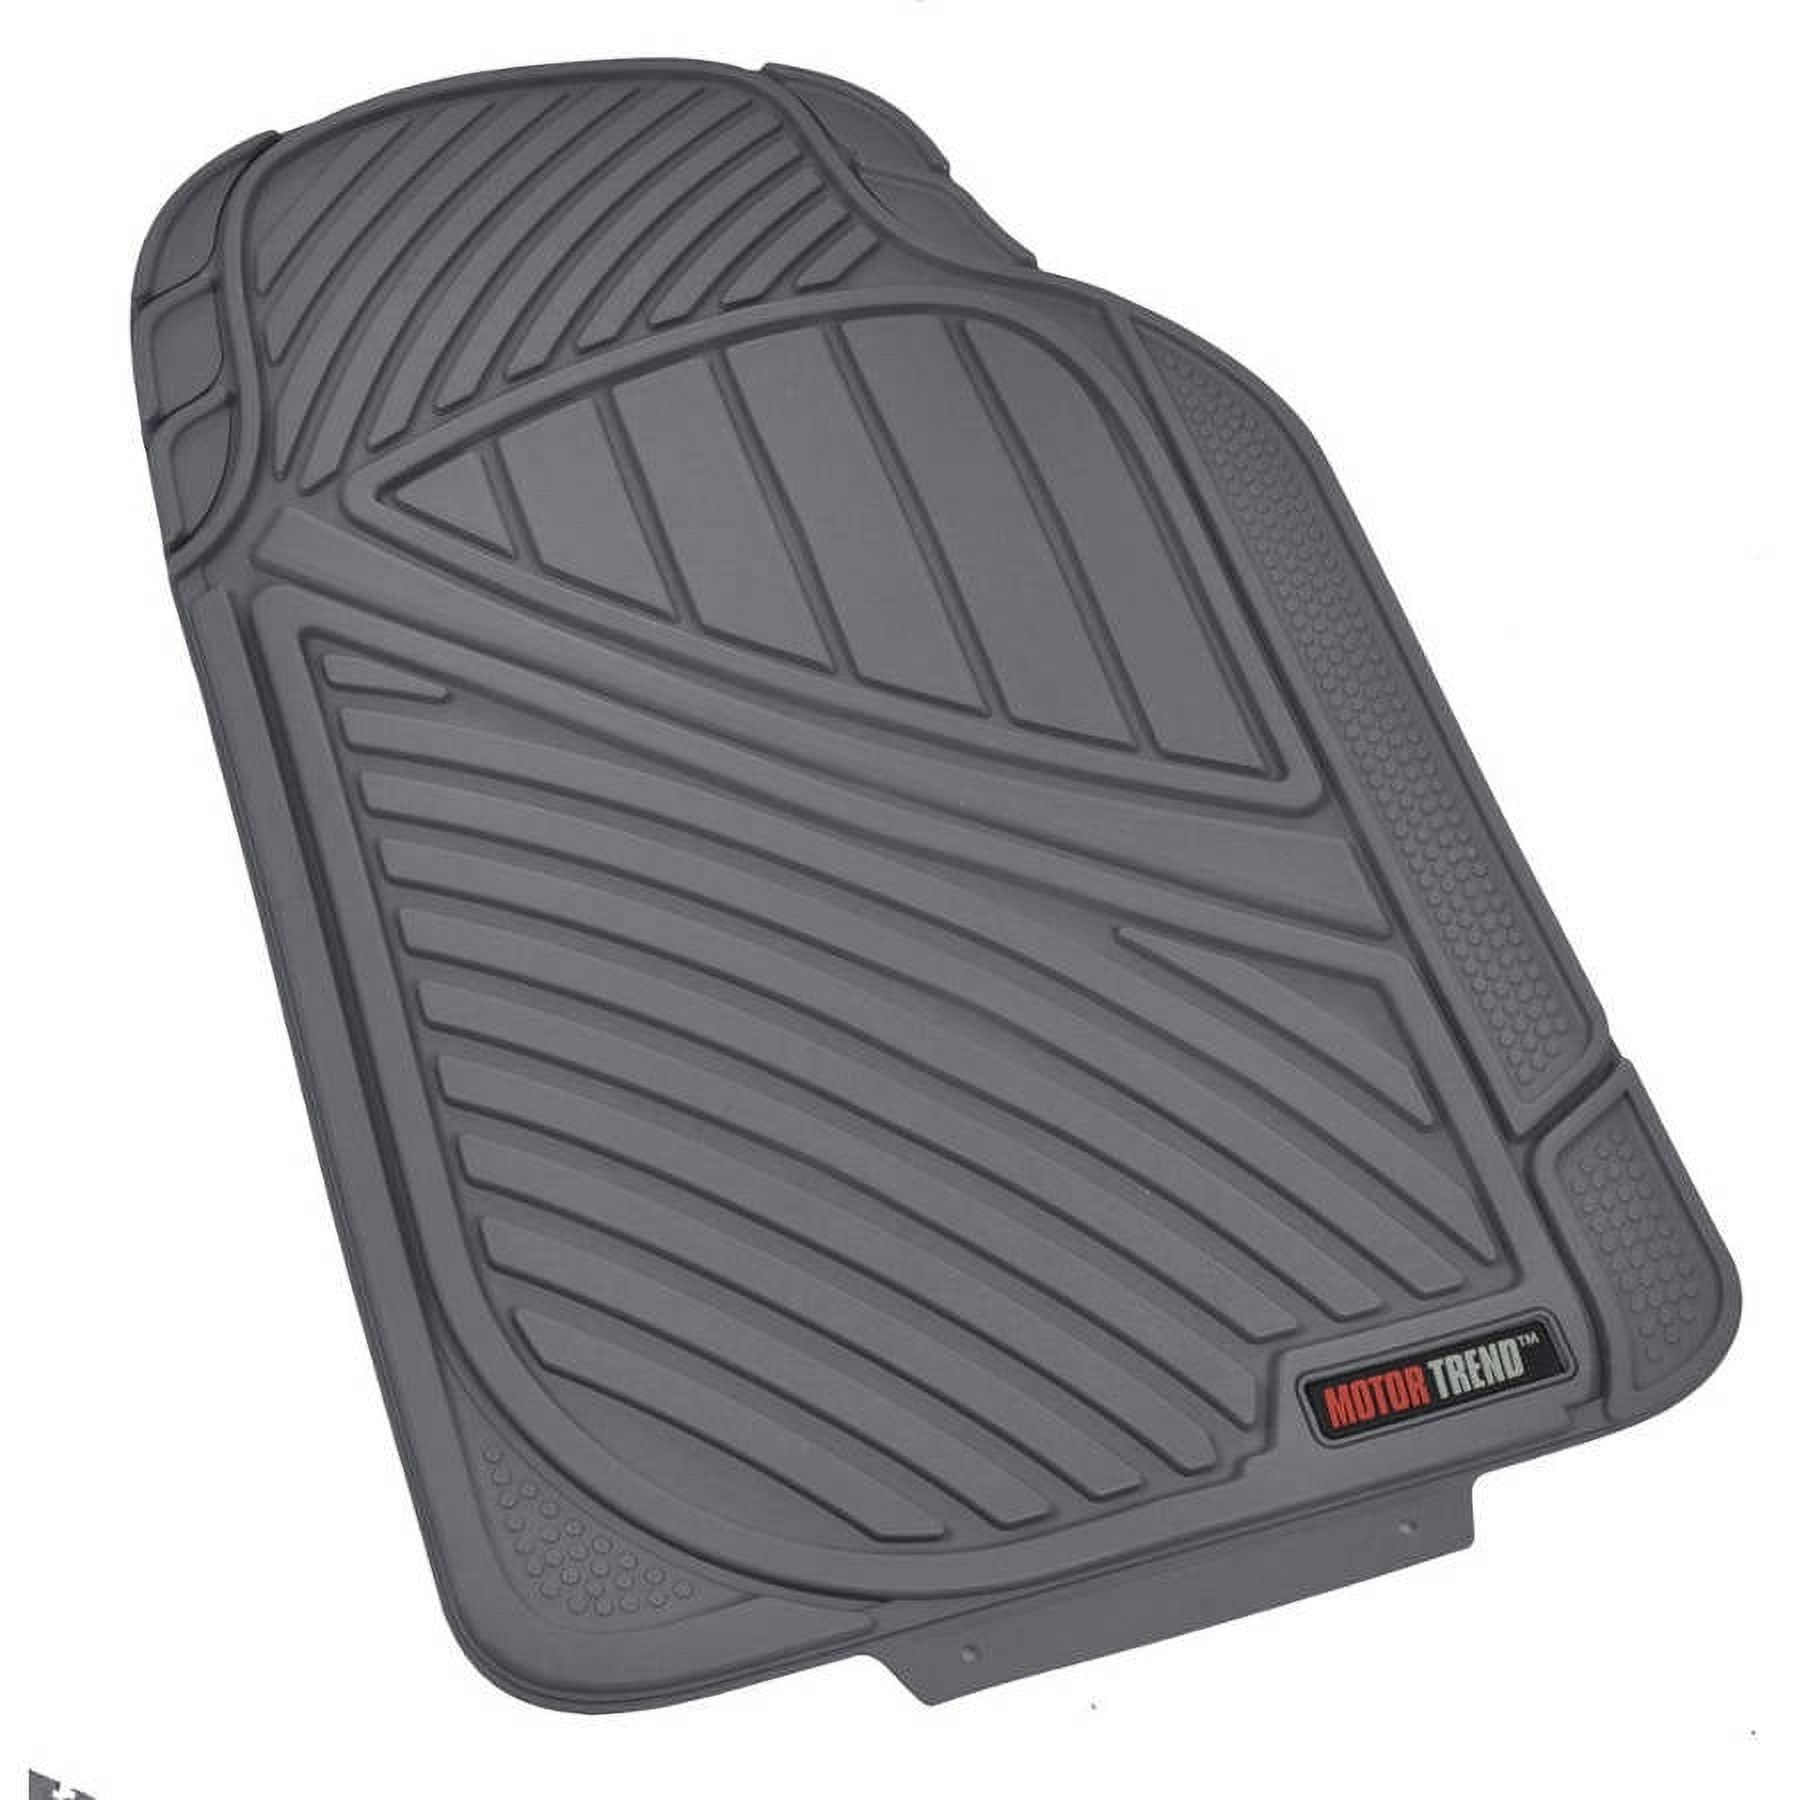 Motor Trend 100 Percent Odorless Car Floor Mats with Standard Trunk Cargo Mat, 4 Pieces Rubber Protection, Black Beige Gray - image 2 of 8